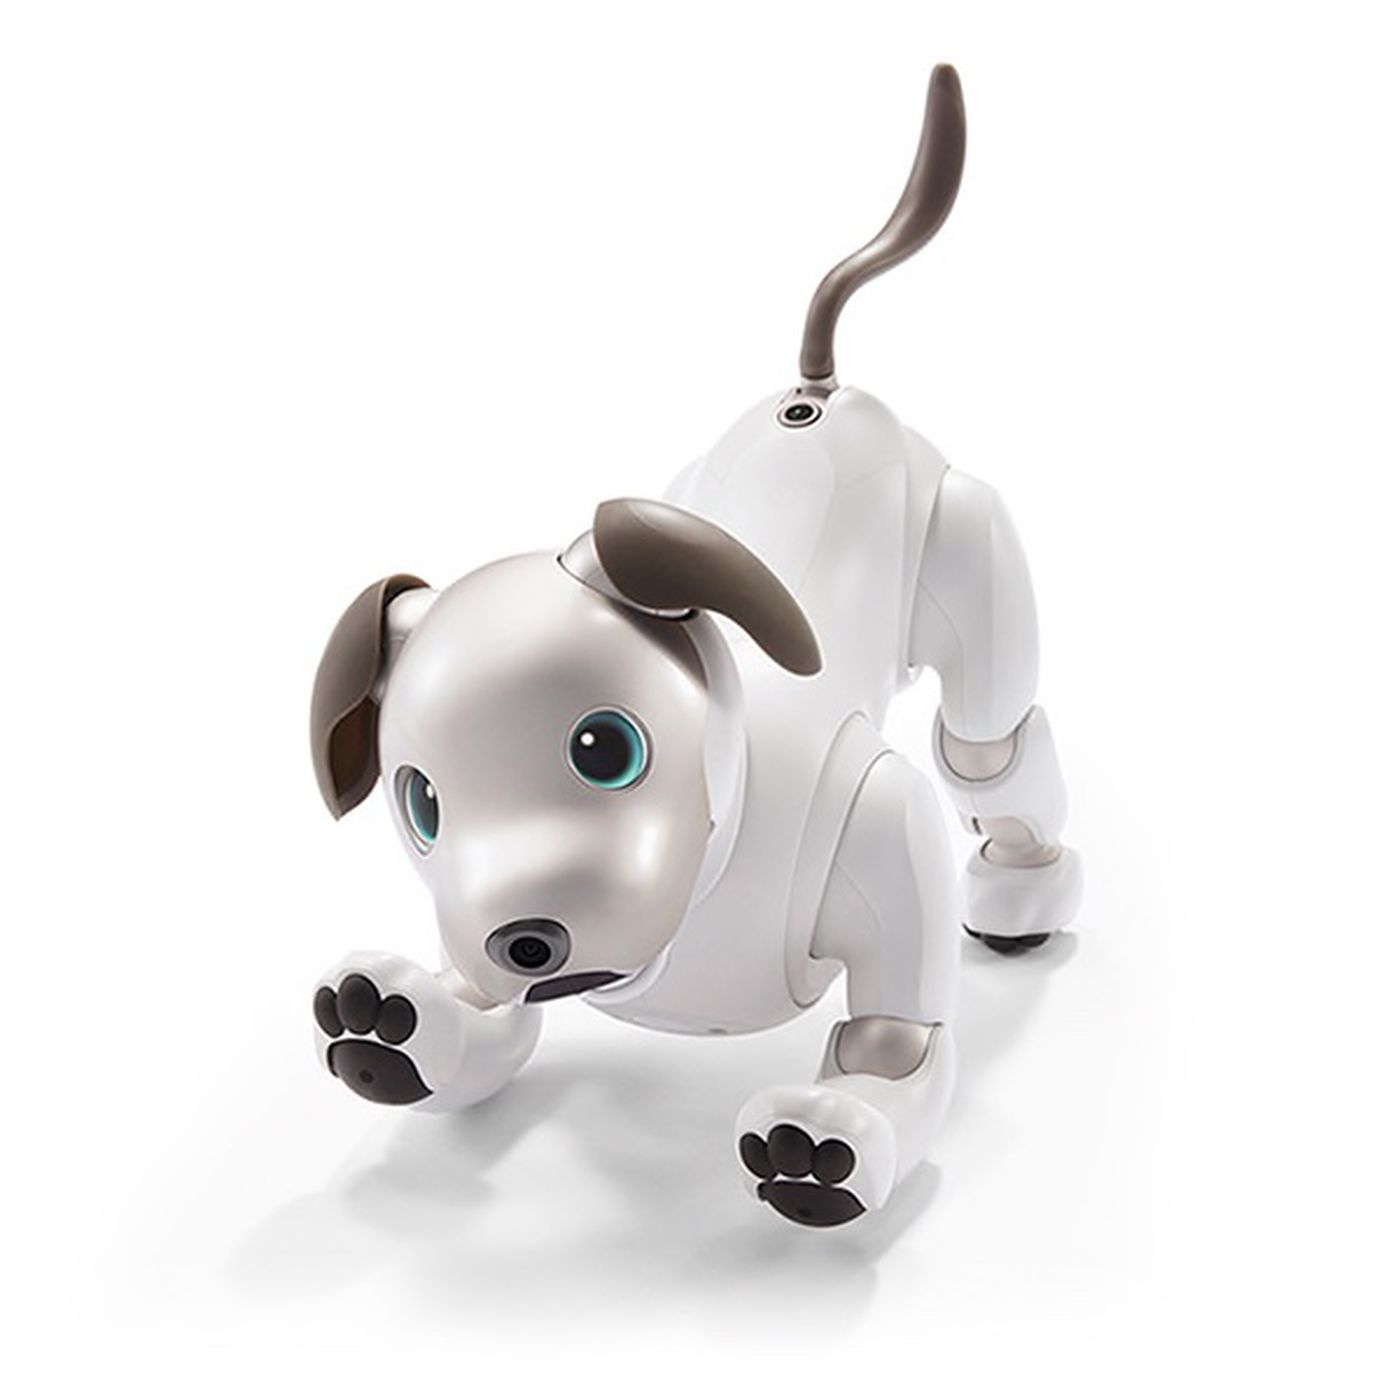 Sony just announced a new Aibo robot dog - The Verge